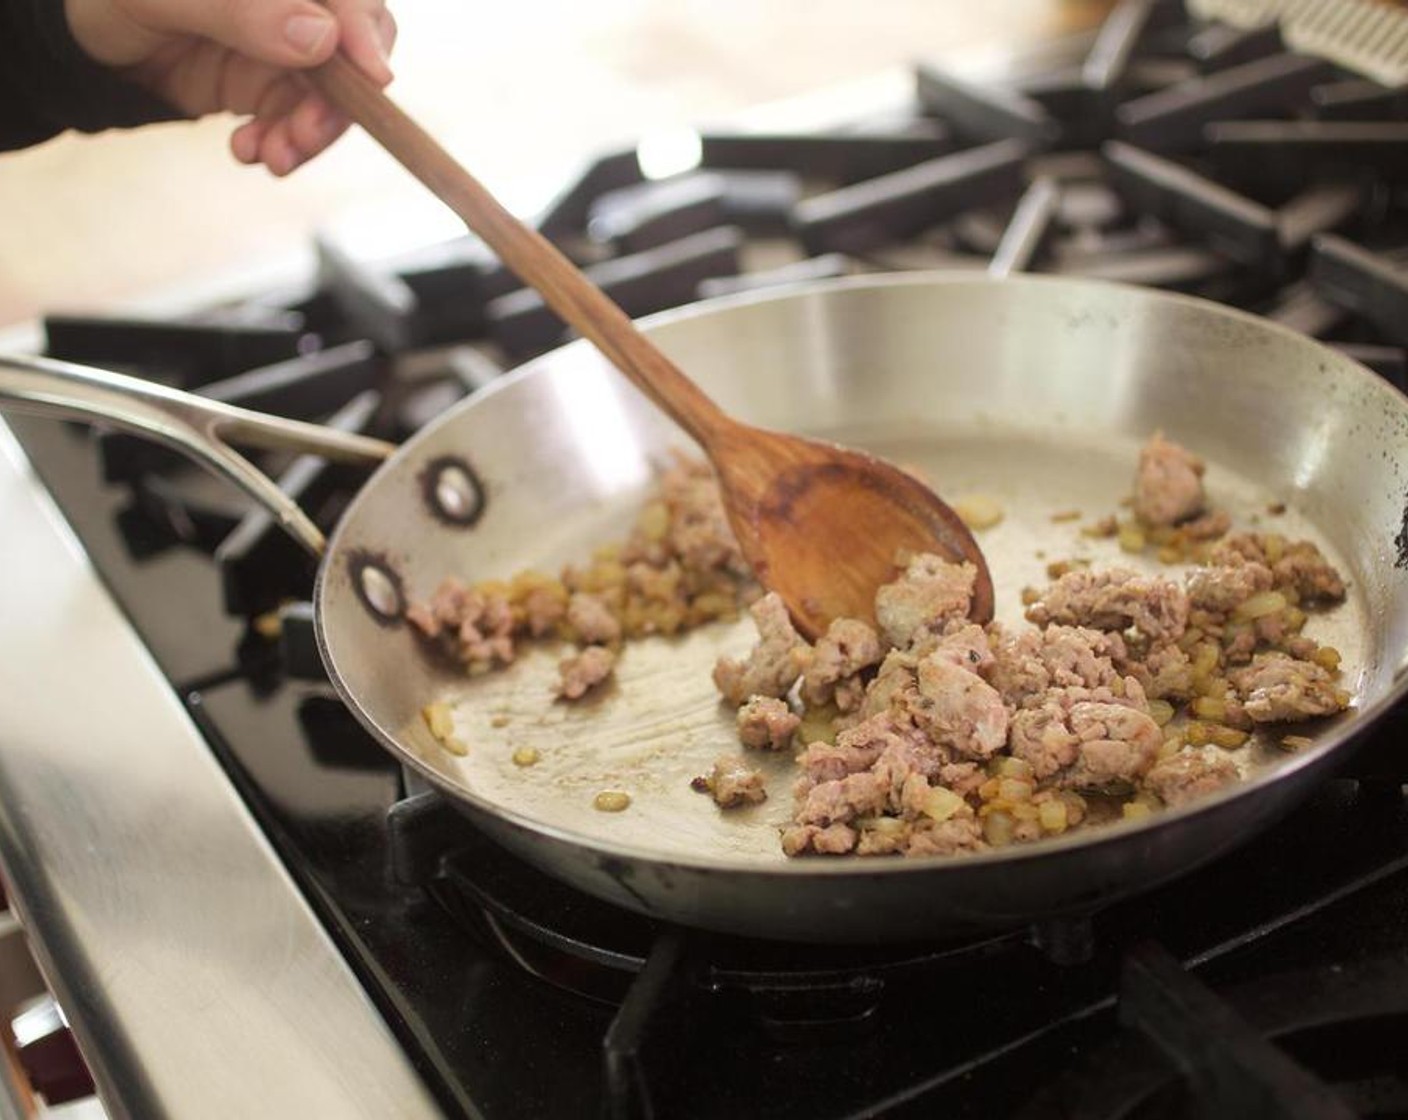 step 5 Crumble the turkey sausage into the pan. Increase heat to medium-high and cook, breaking the turkey sausage up as you stir, until the sausage is fully cooked.